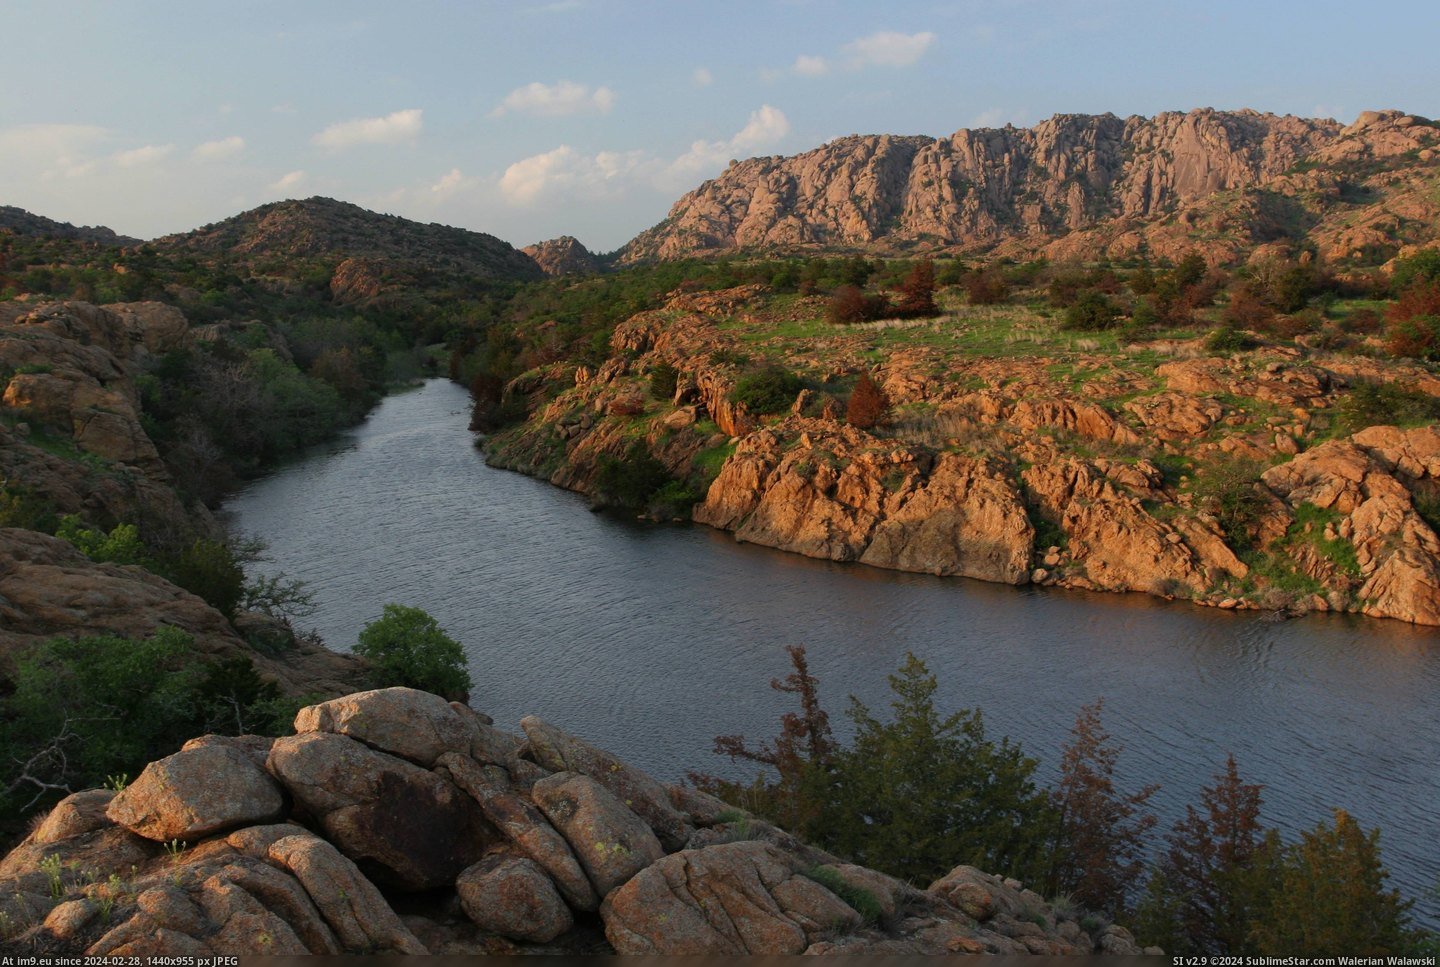 #Mountains #Underrated #Wichita #Oklahoma [Earthporn] The Novel and Underrated Wichita Mountains of Oklahoma [3504 x 2336] Pic. (Изображение из альбом My r/EARTHPORN favs))